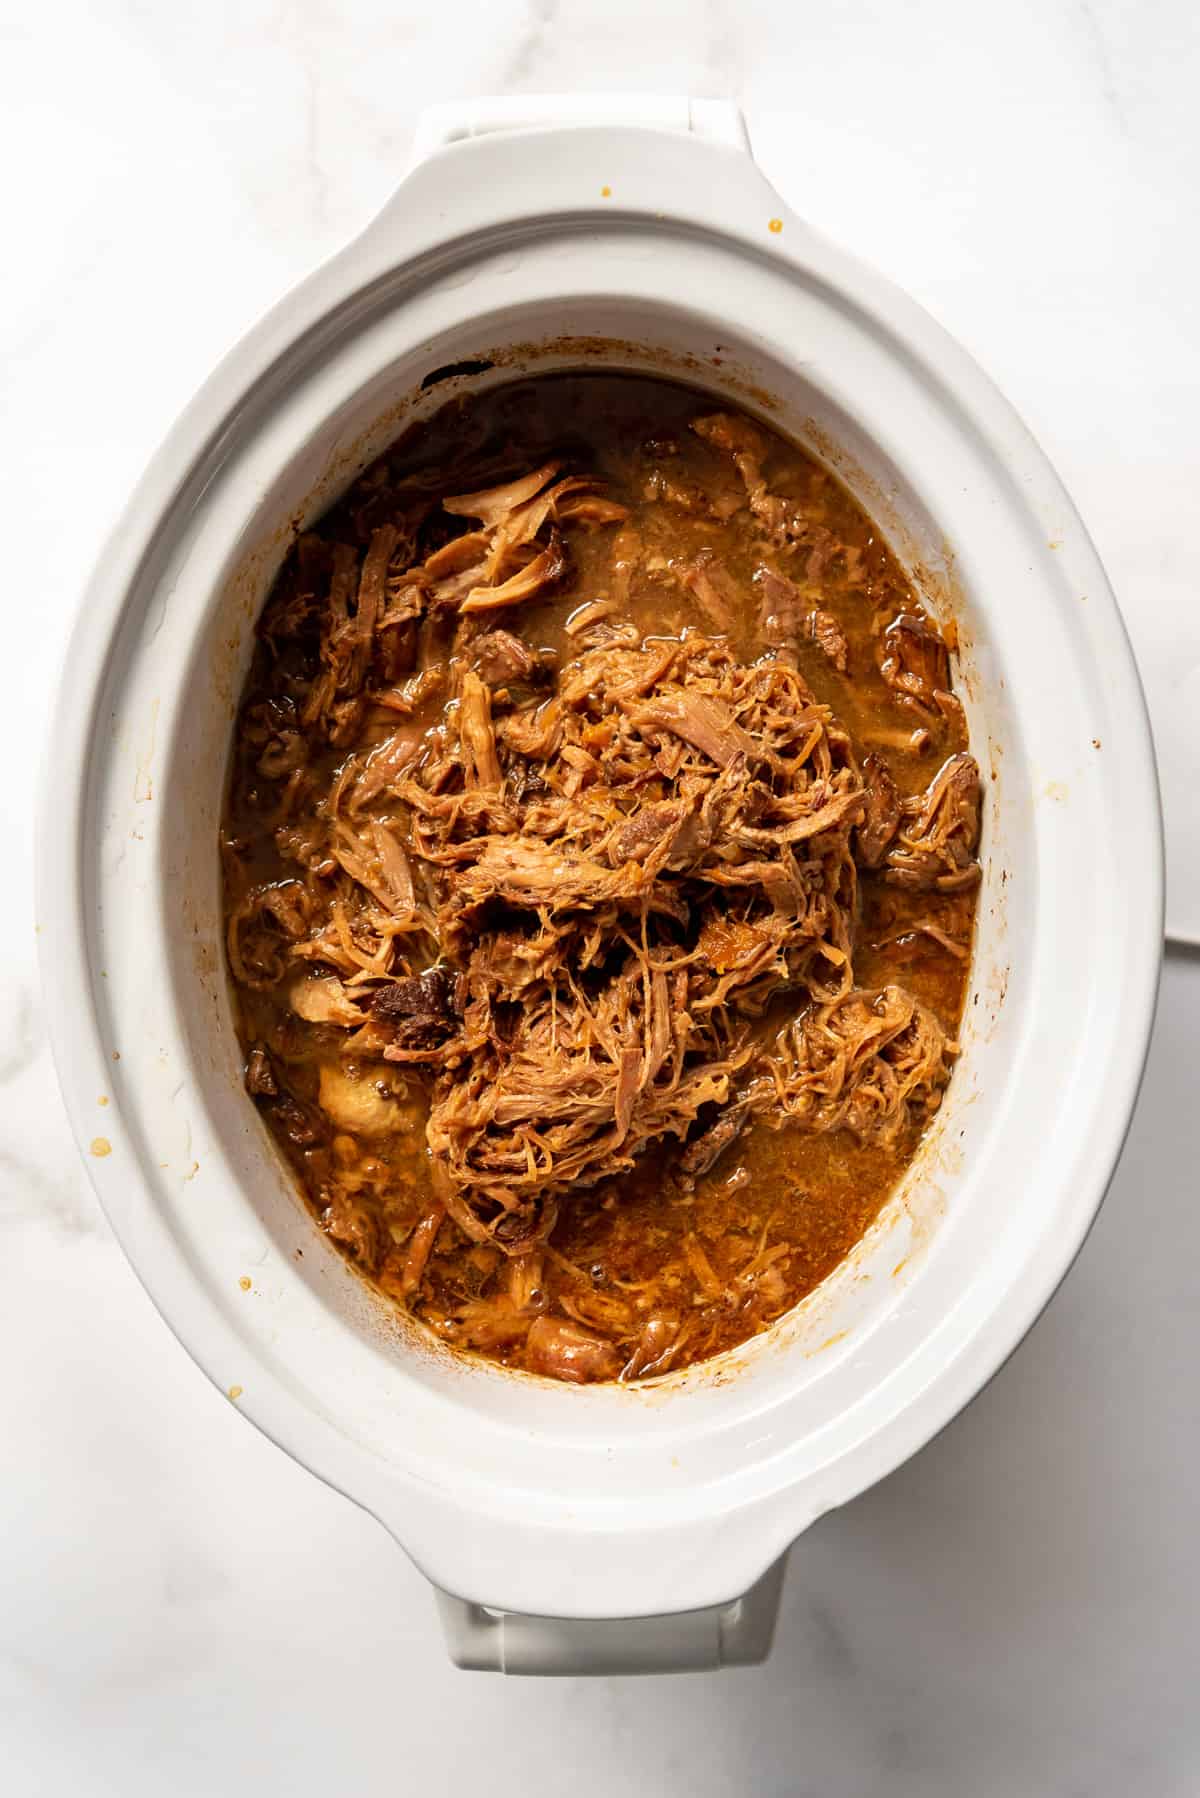 A white crockpot with pulled pork in an apricot sauce.